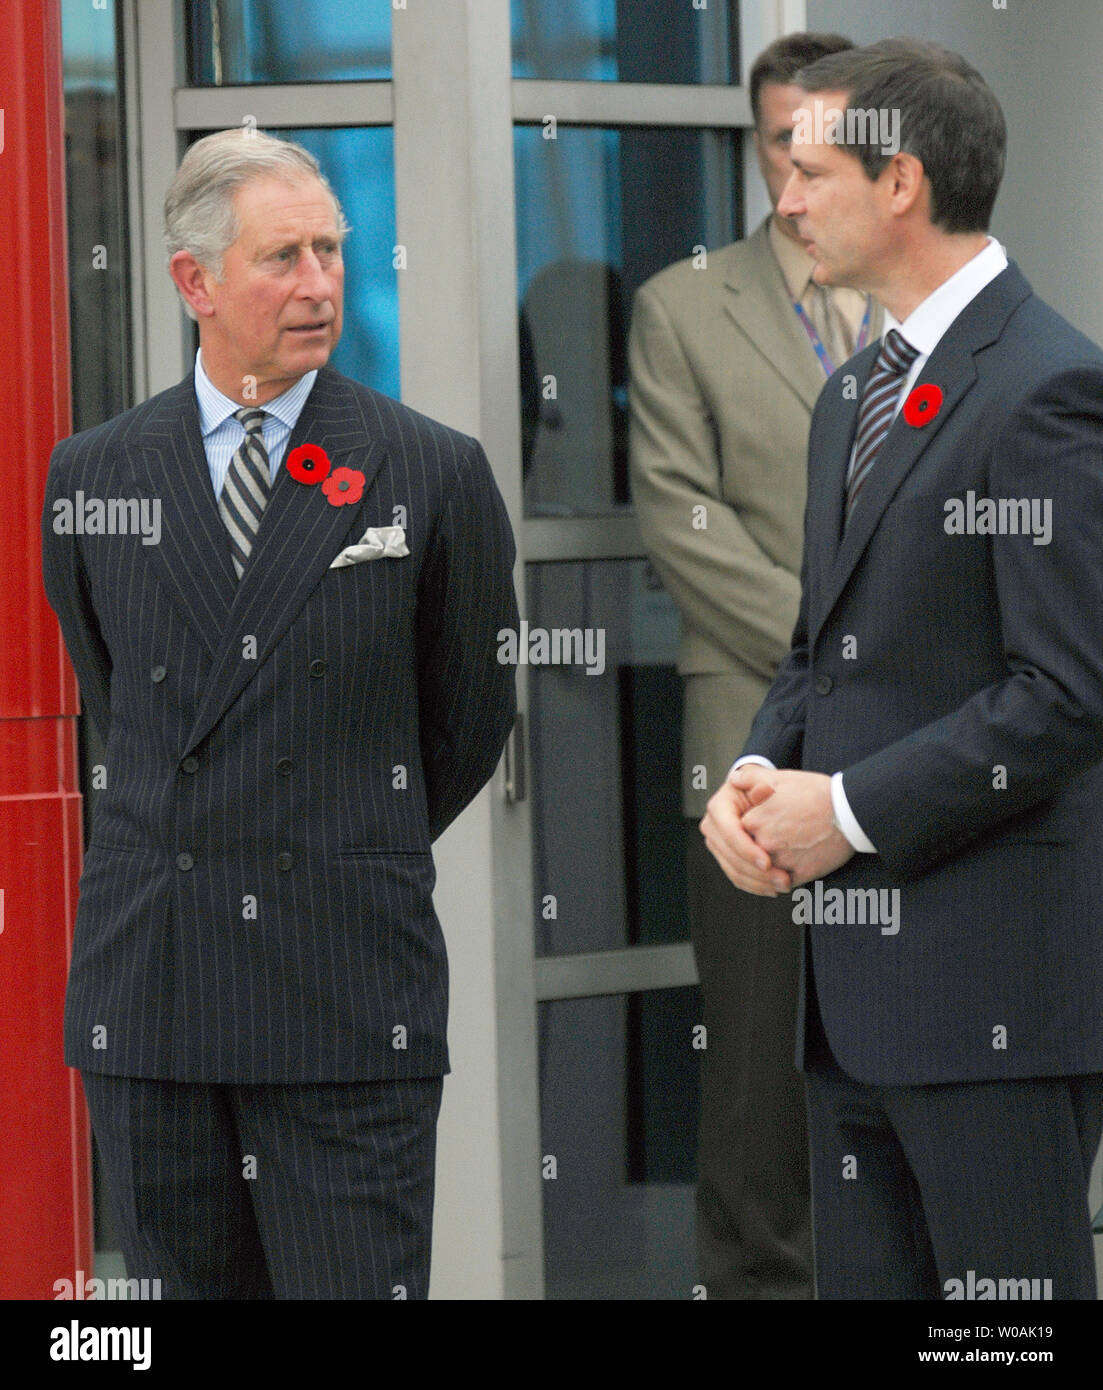 Britain's Prince Charles (R) and Ontario premier Dalton McGuinty chat as the Prince and his wife Camilla, Duchess of Cornwall, arrive at Pearson International Airport in Toronto, Canada on November 4, 2009.  The royal couple are on an 11-day tour of Canada.  UPI /Christine Chew Stock Photo